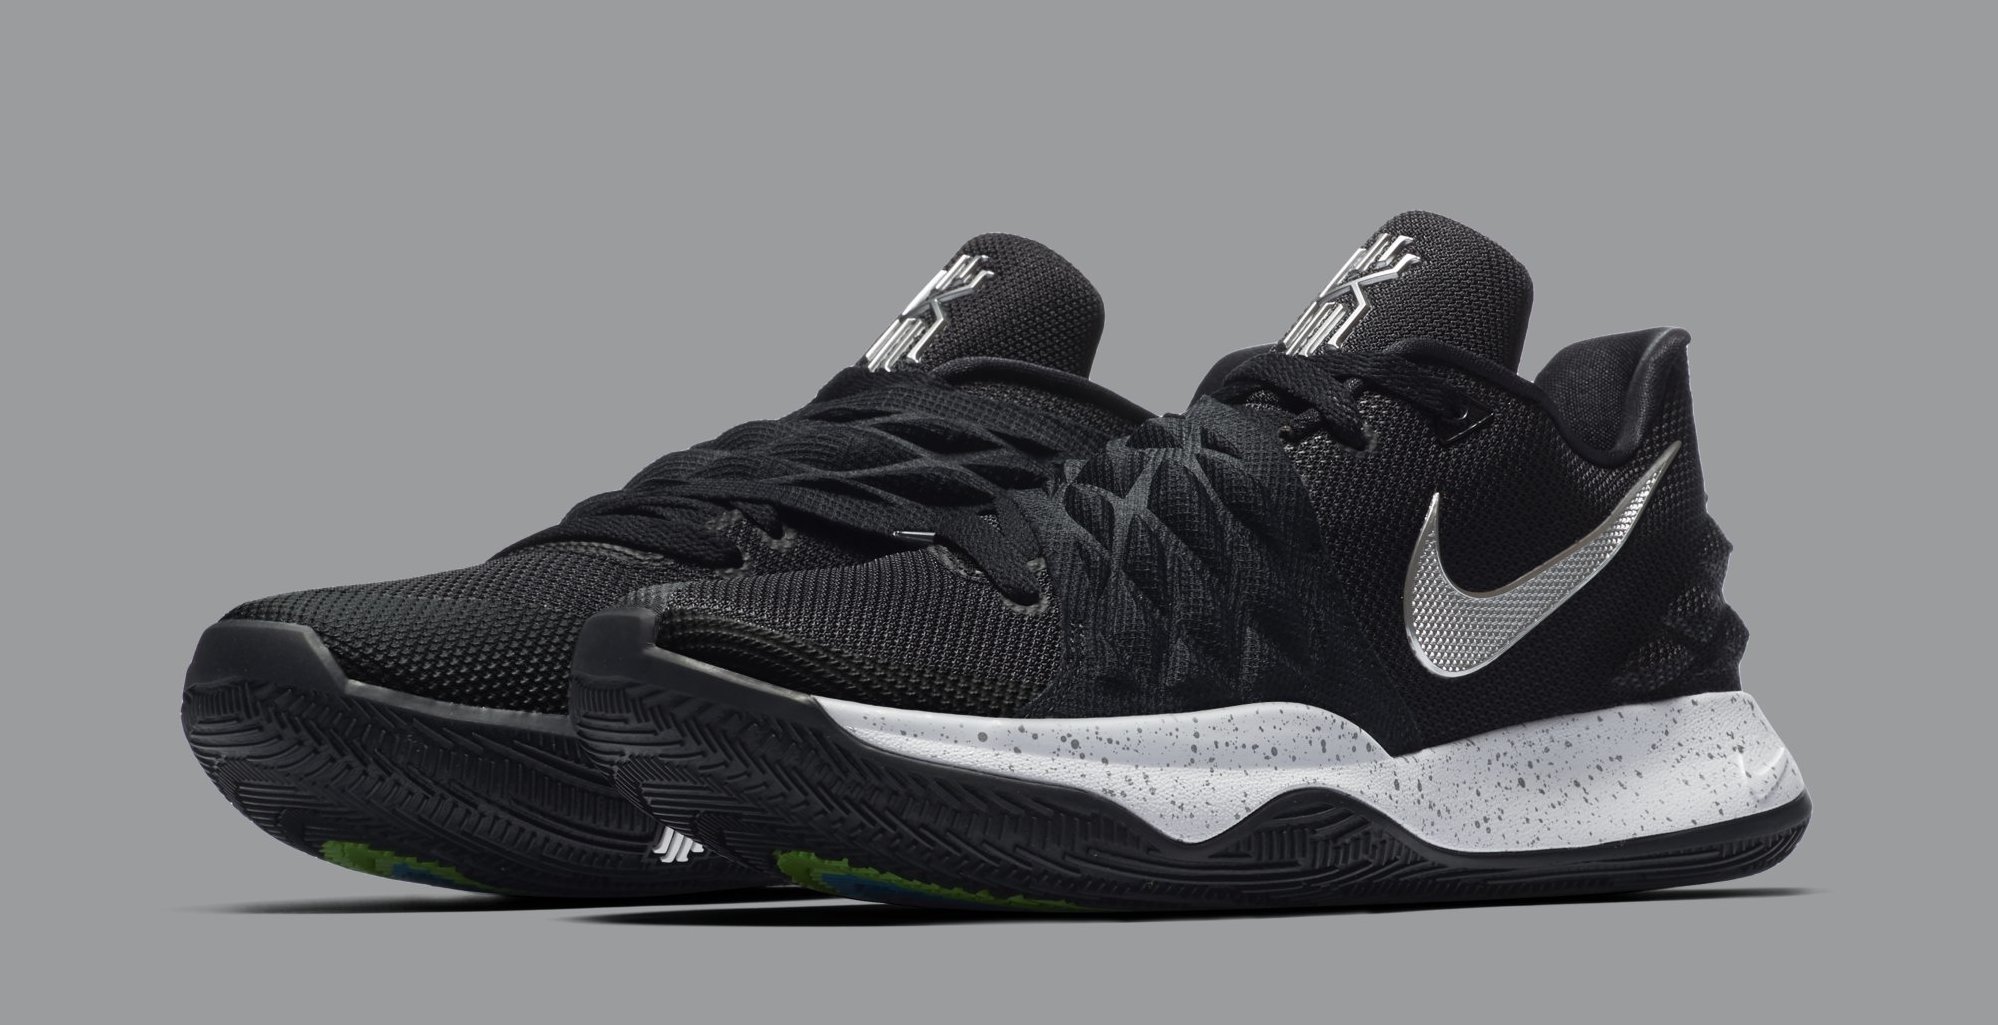 kyrie 4s black and white cheap online